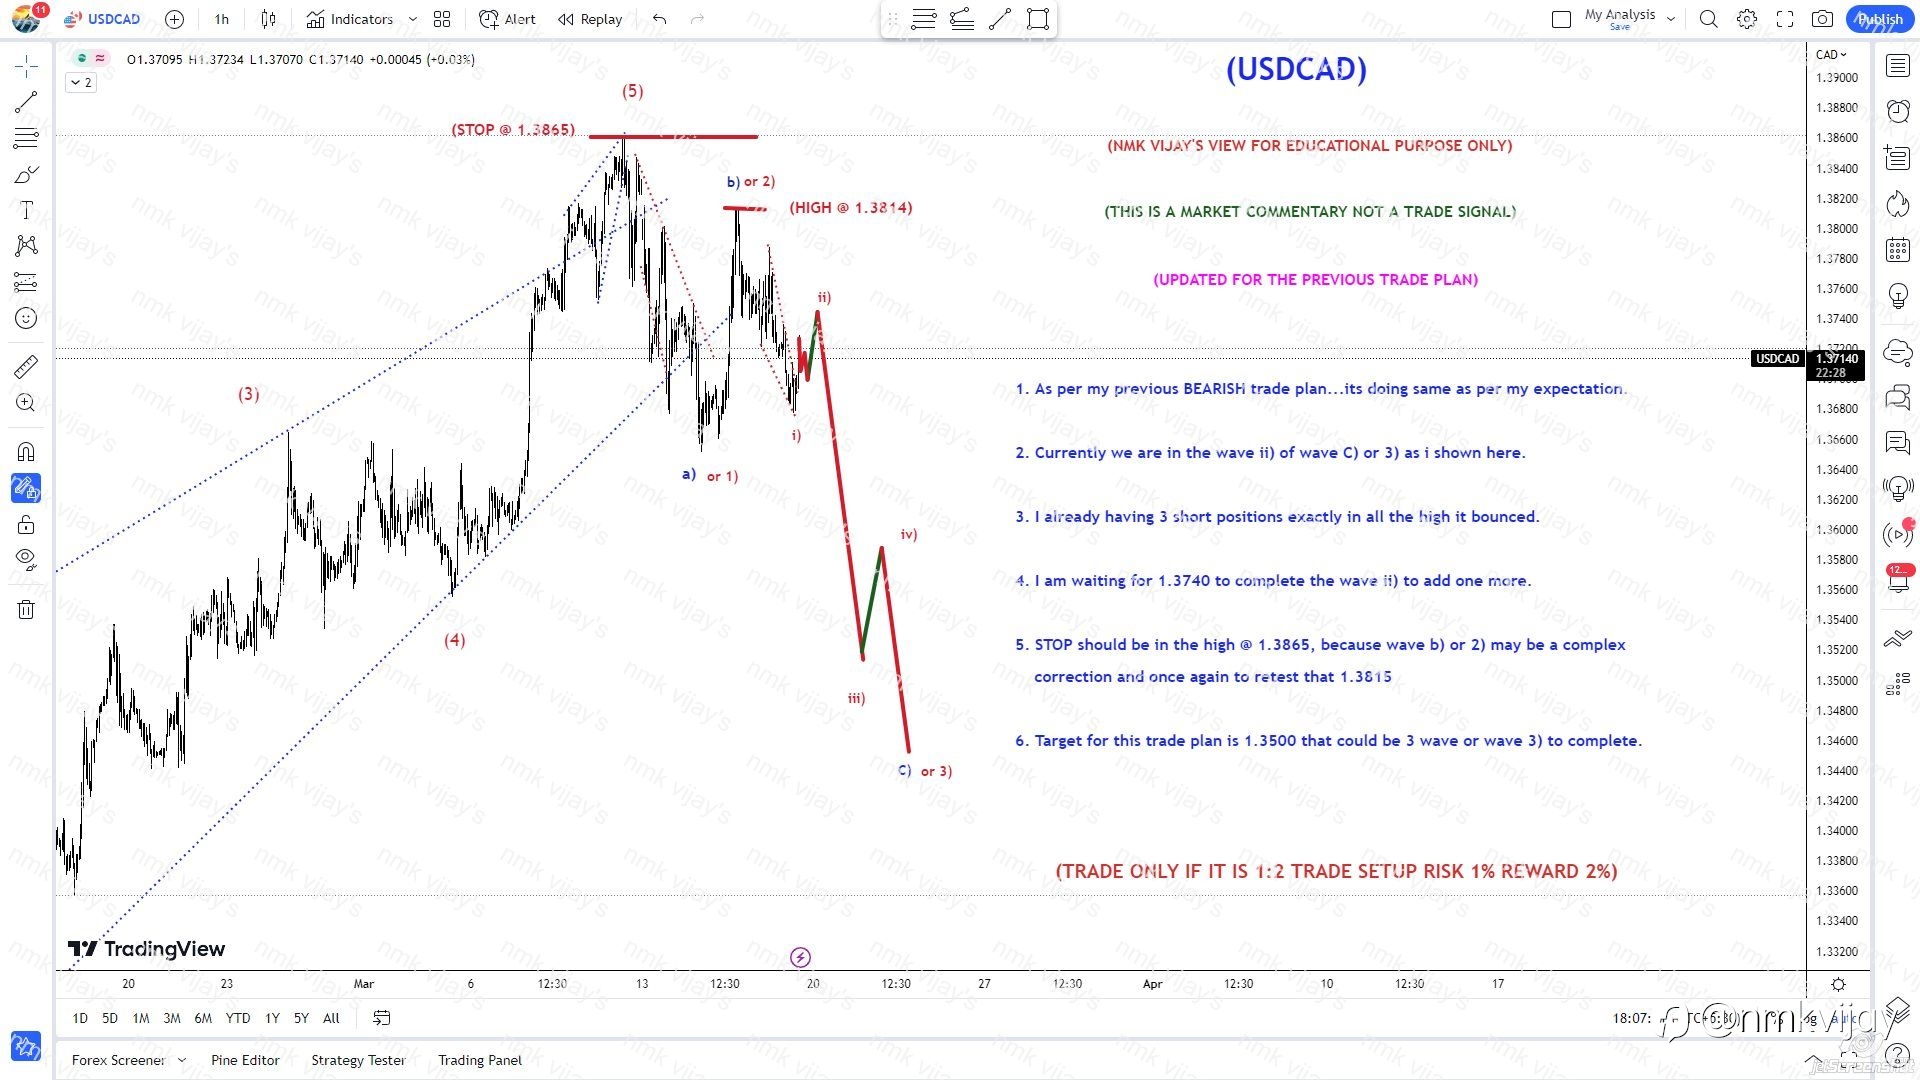 USDCAD-Doing as per previous plan BEARISH TP 1.35 for 3) or C)